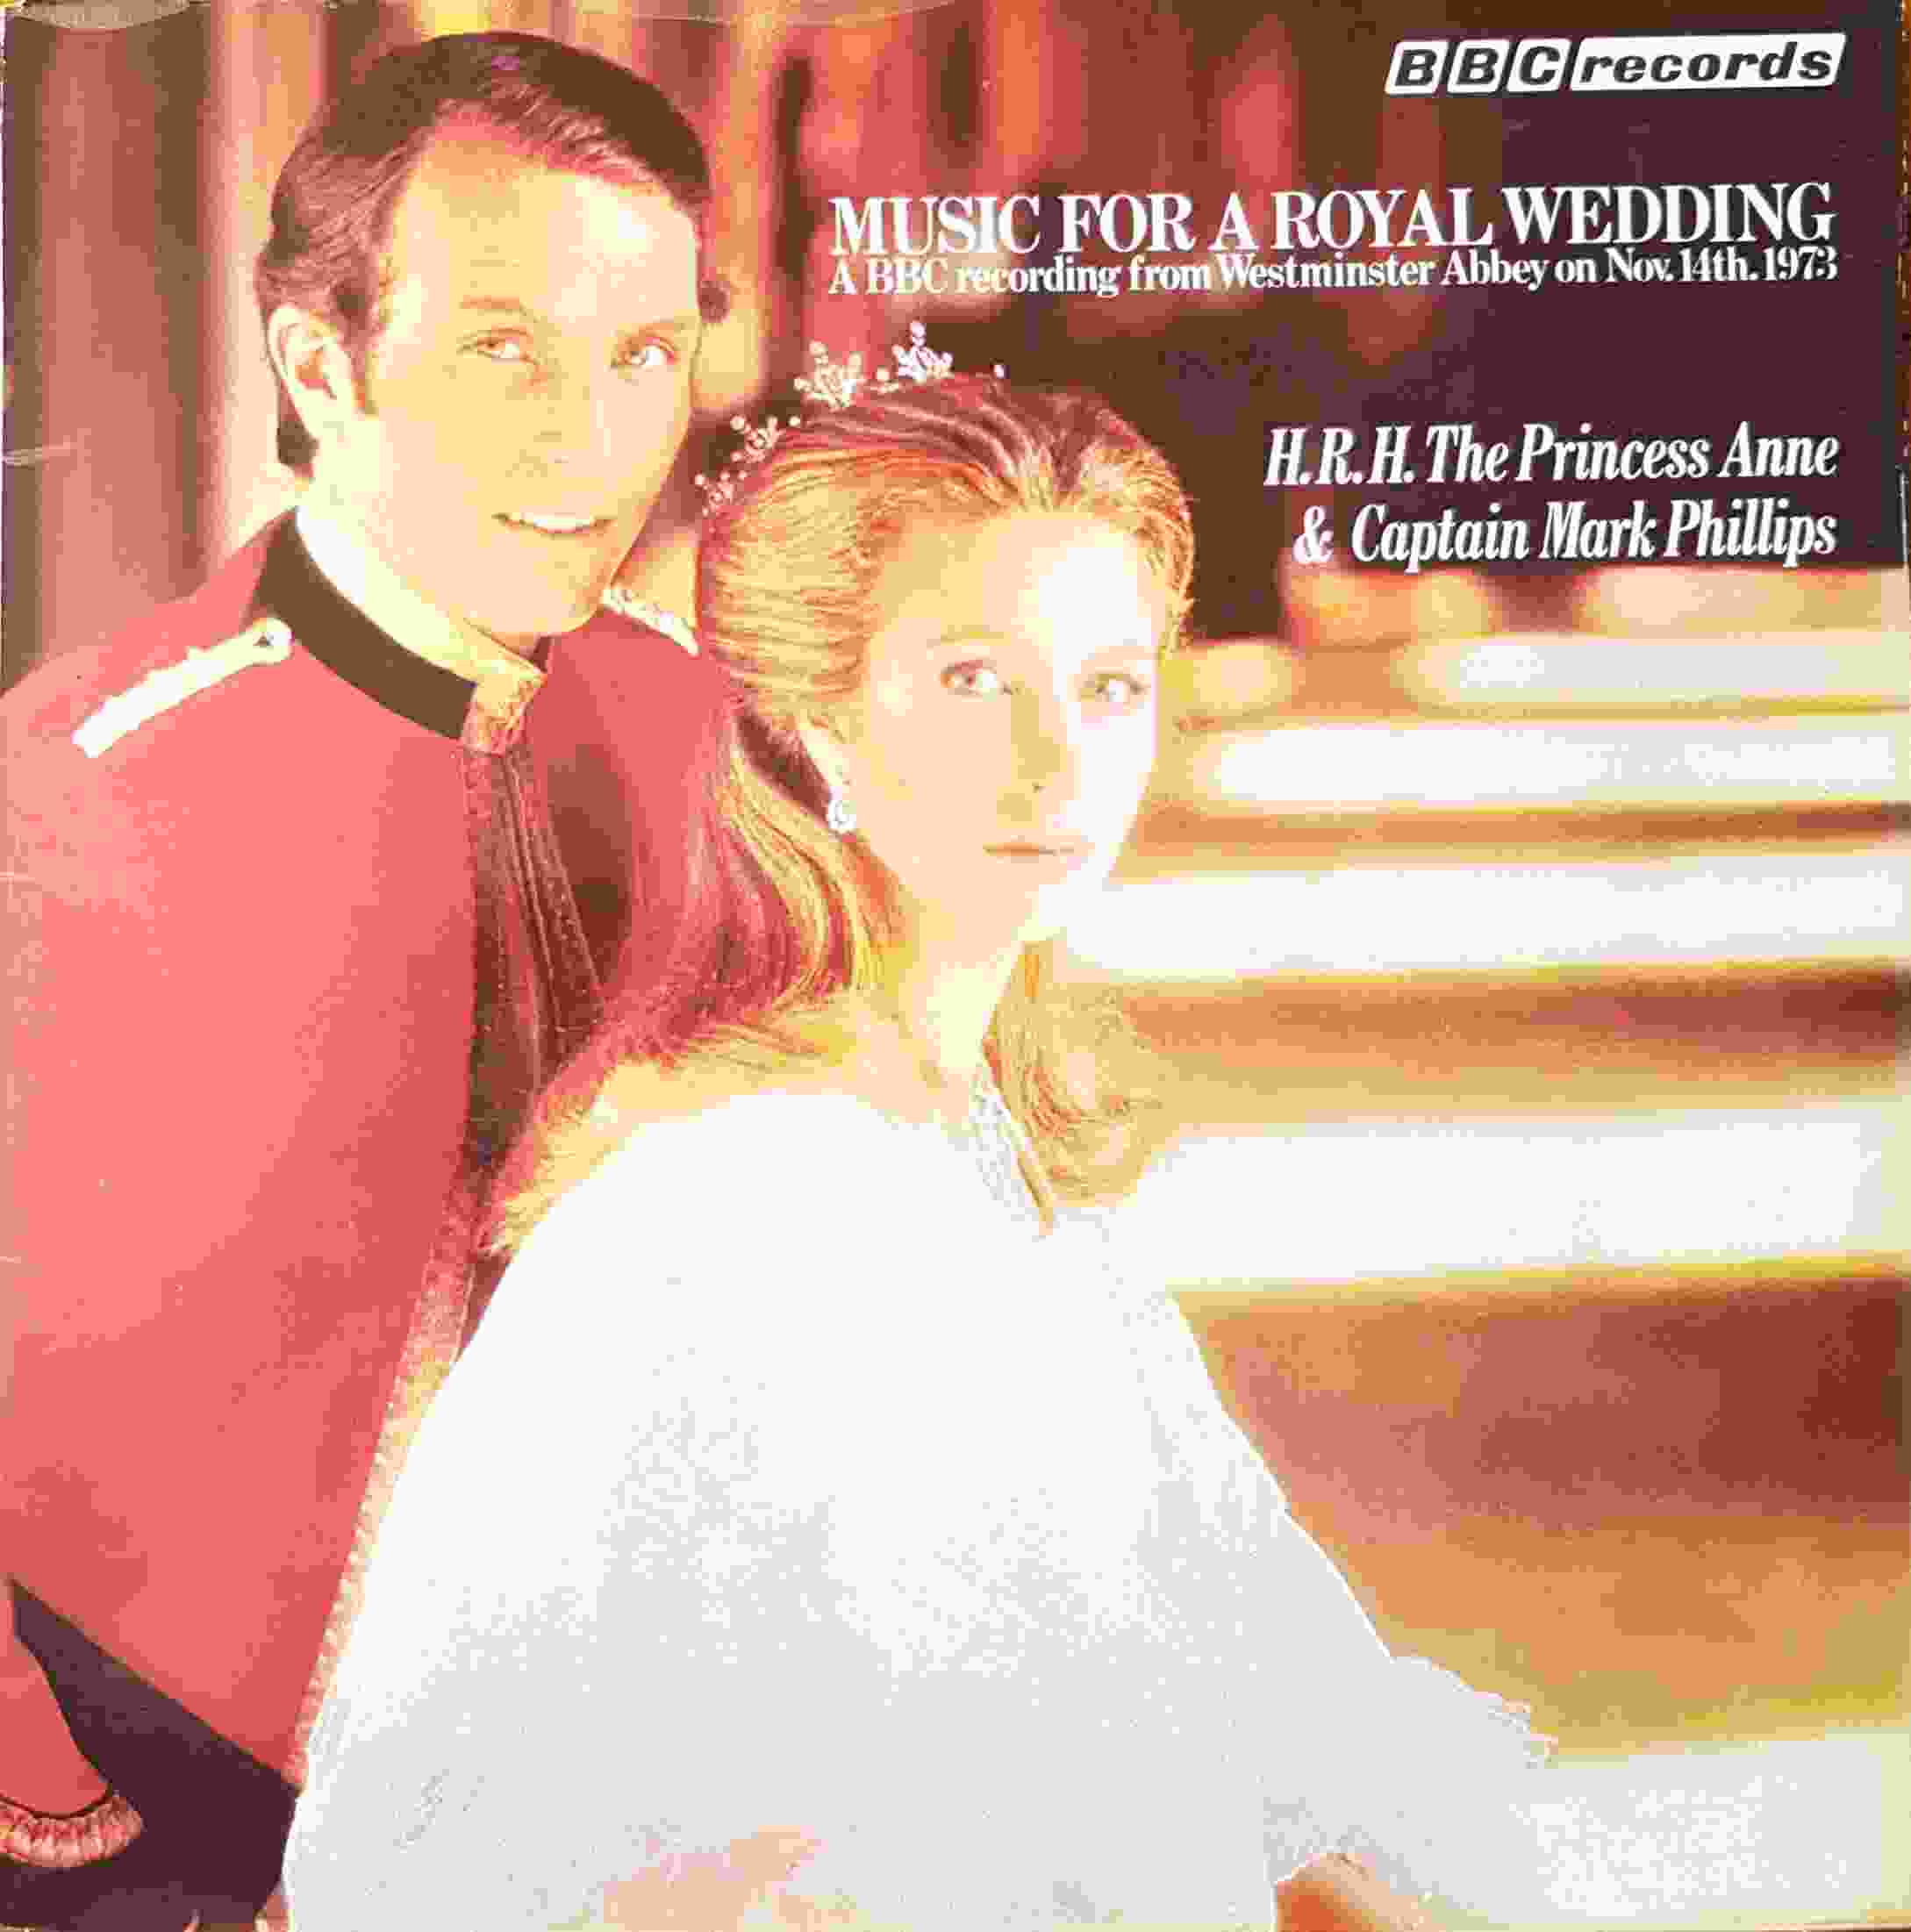 Picture of REW 163 Music for a Royal wedding by artist Various from the BBC albums - Records and Tapes library